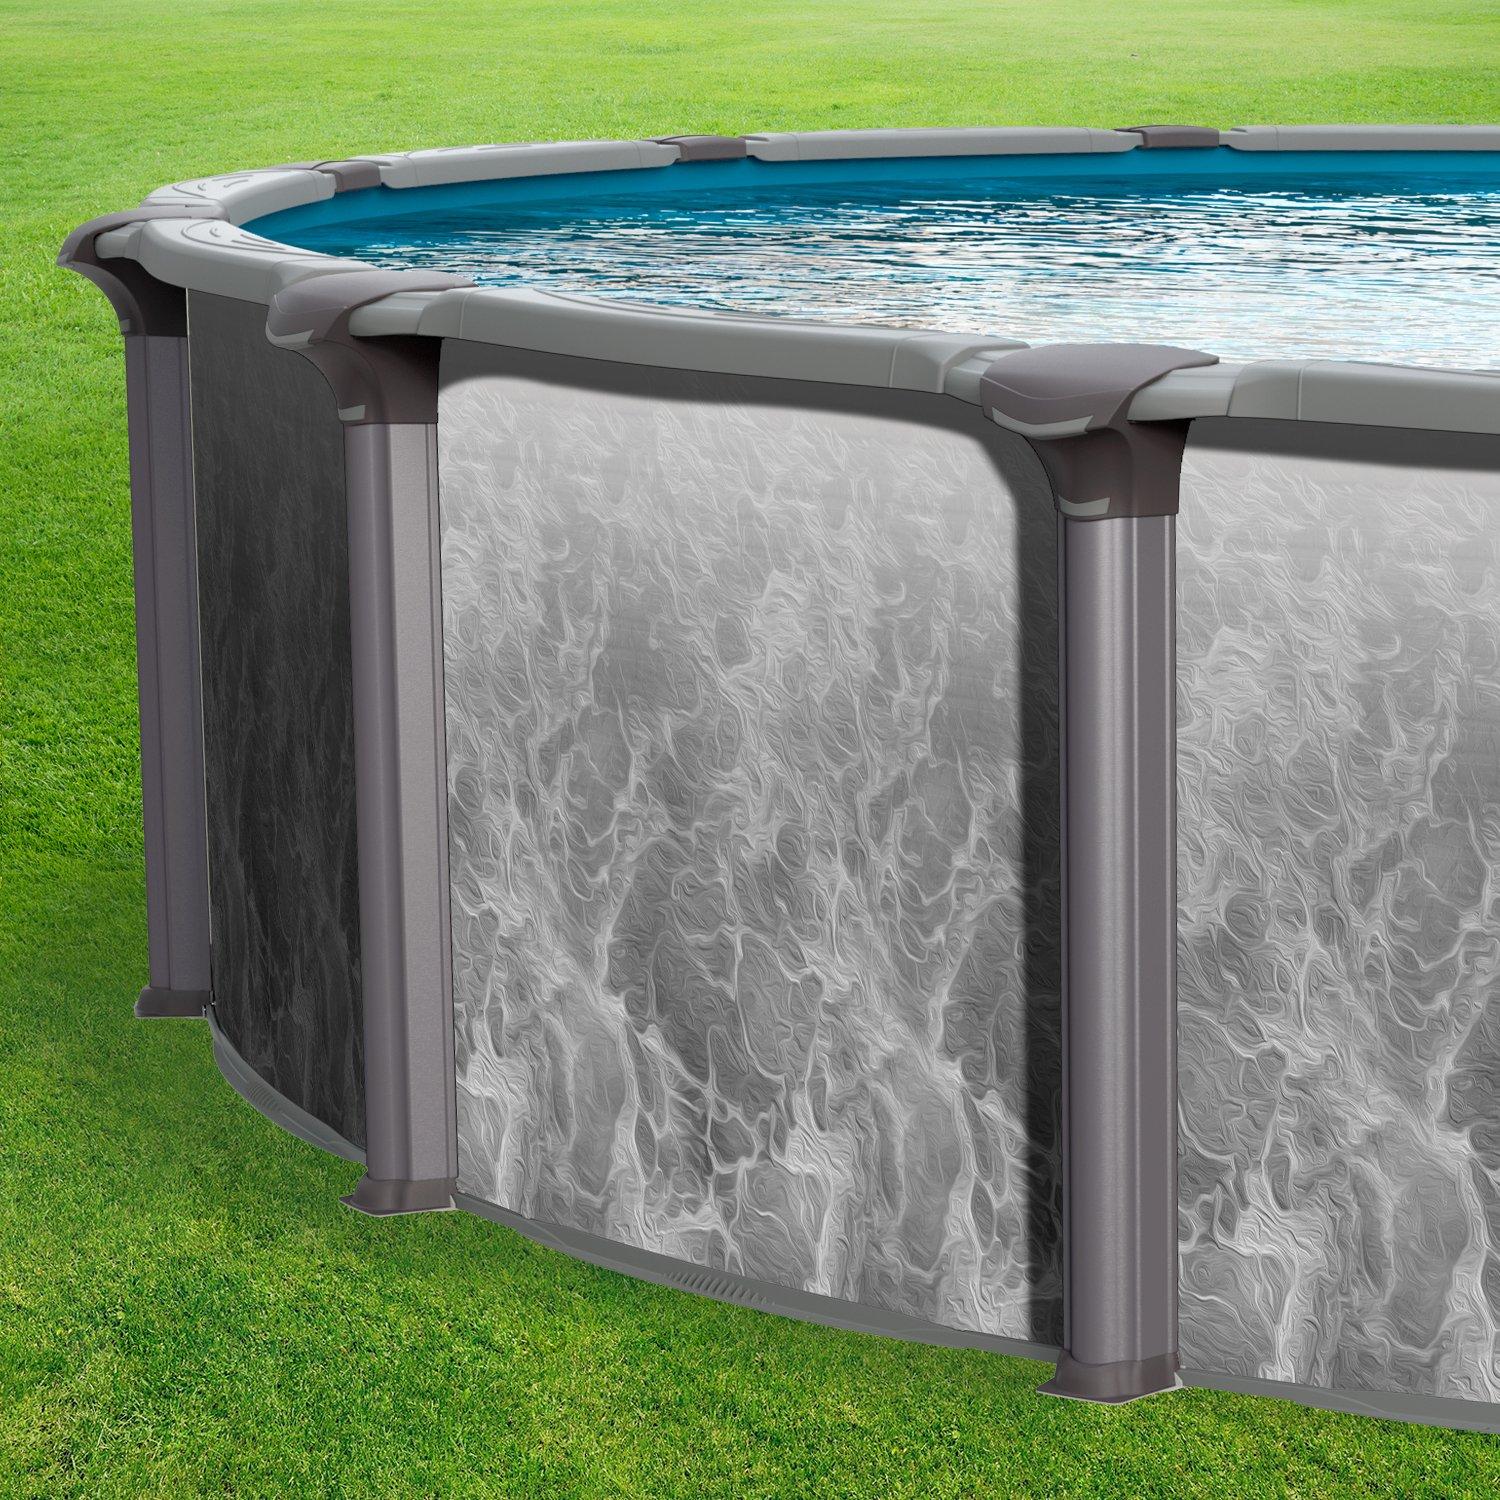 Emotion 15' x 52 Round Above Ground Pool Package